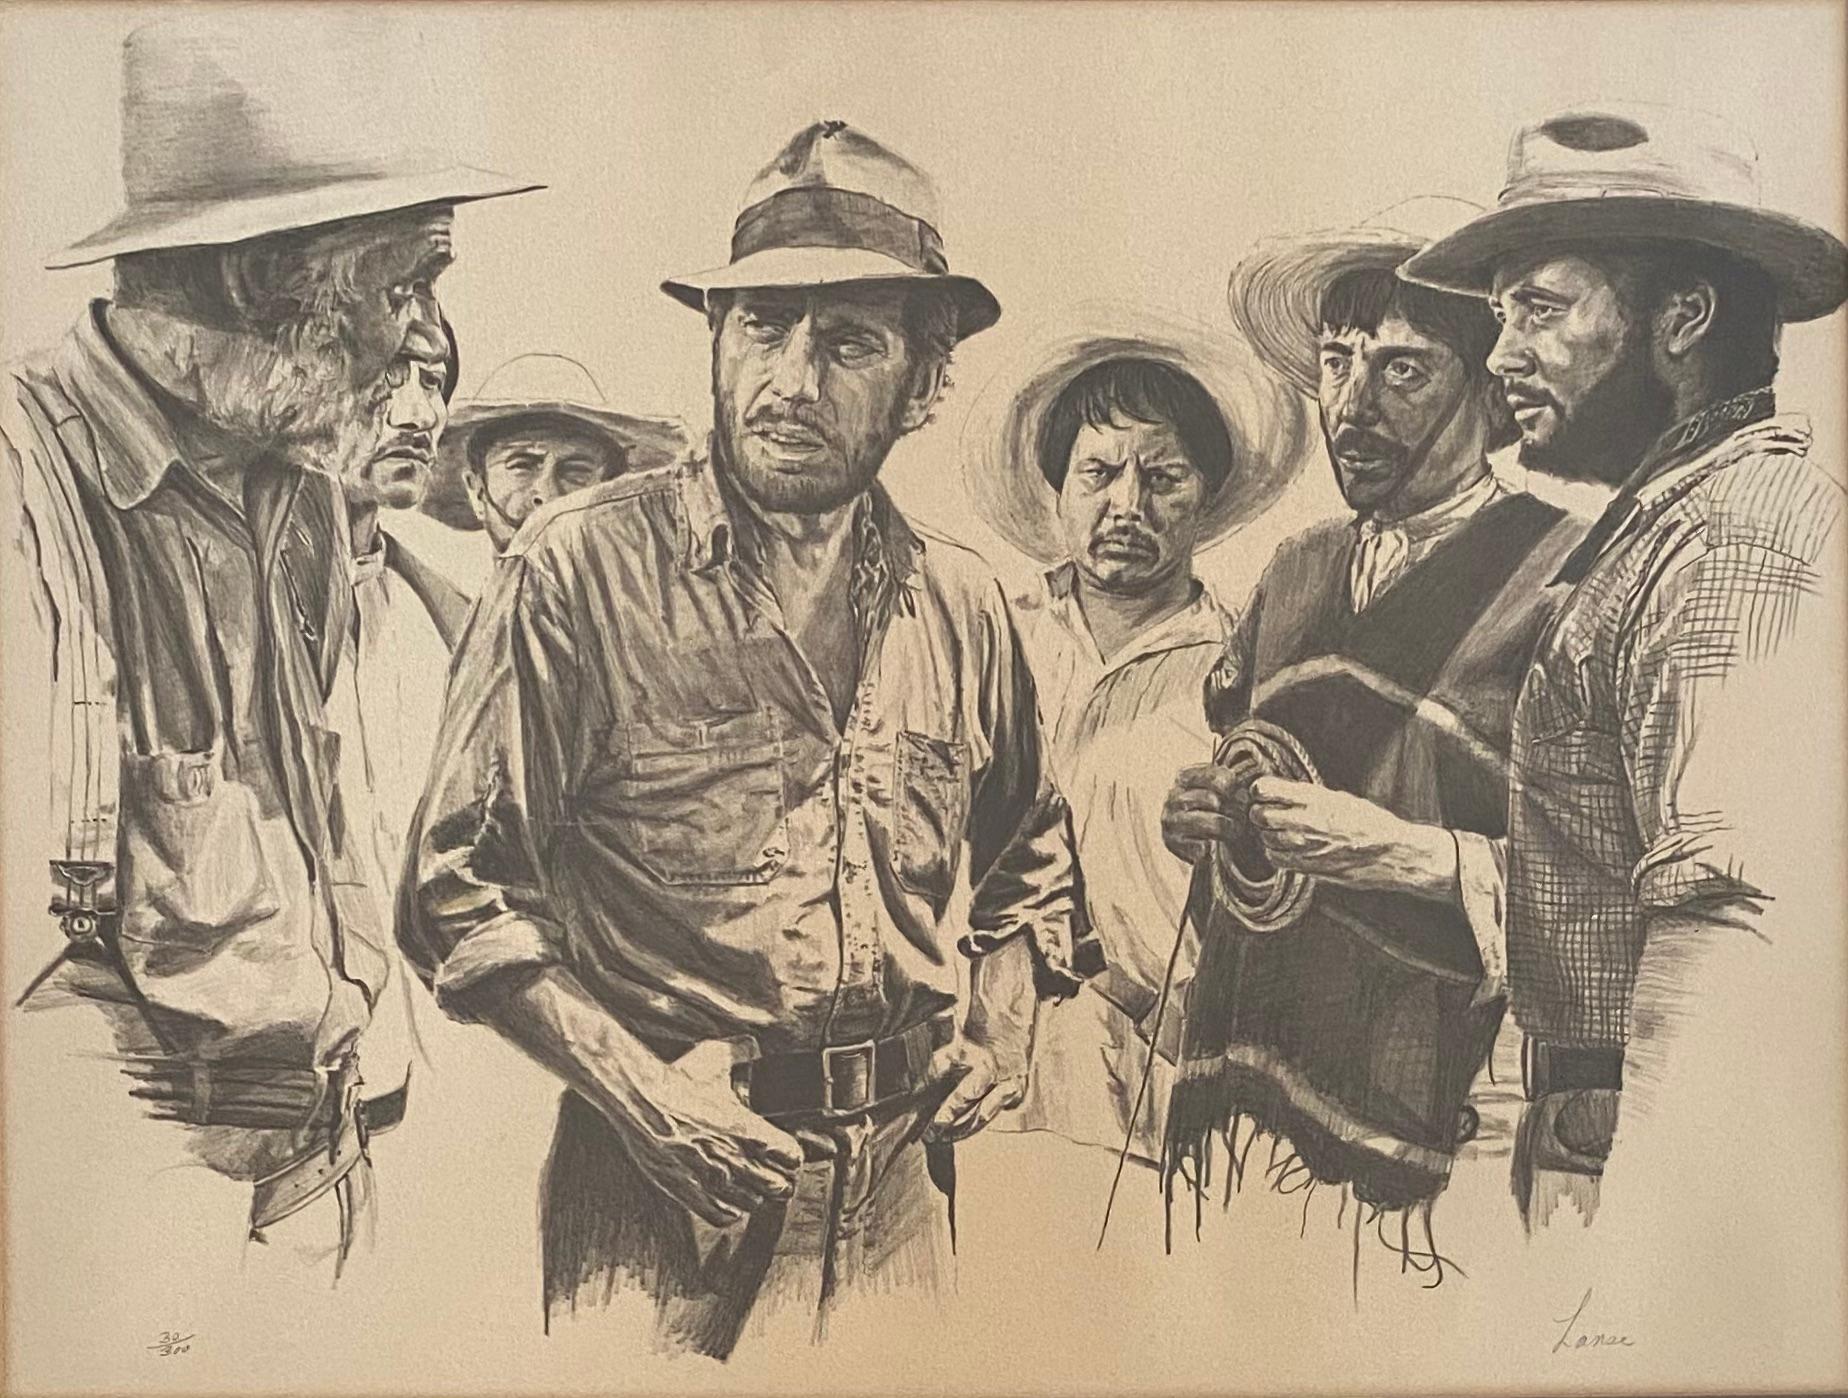 A very nice Hollywood movie original lithograph for the film The Treasure of the Sierra Madre, directed by John Huston. Starring Humphrey Bogart, Walter Huston, Tim Holt, Bruce Bennett. 

This very decorative lithograph is numbered 30/300 and is